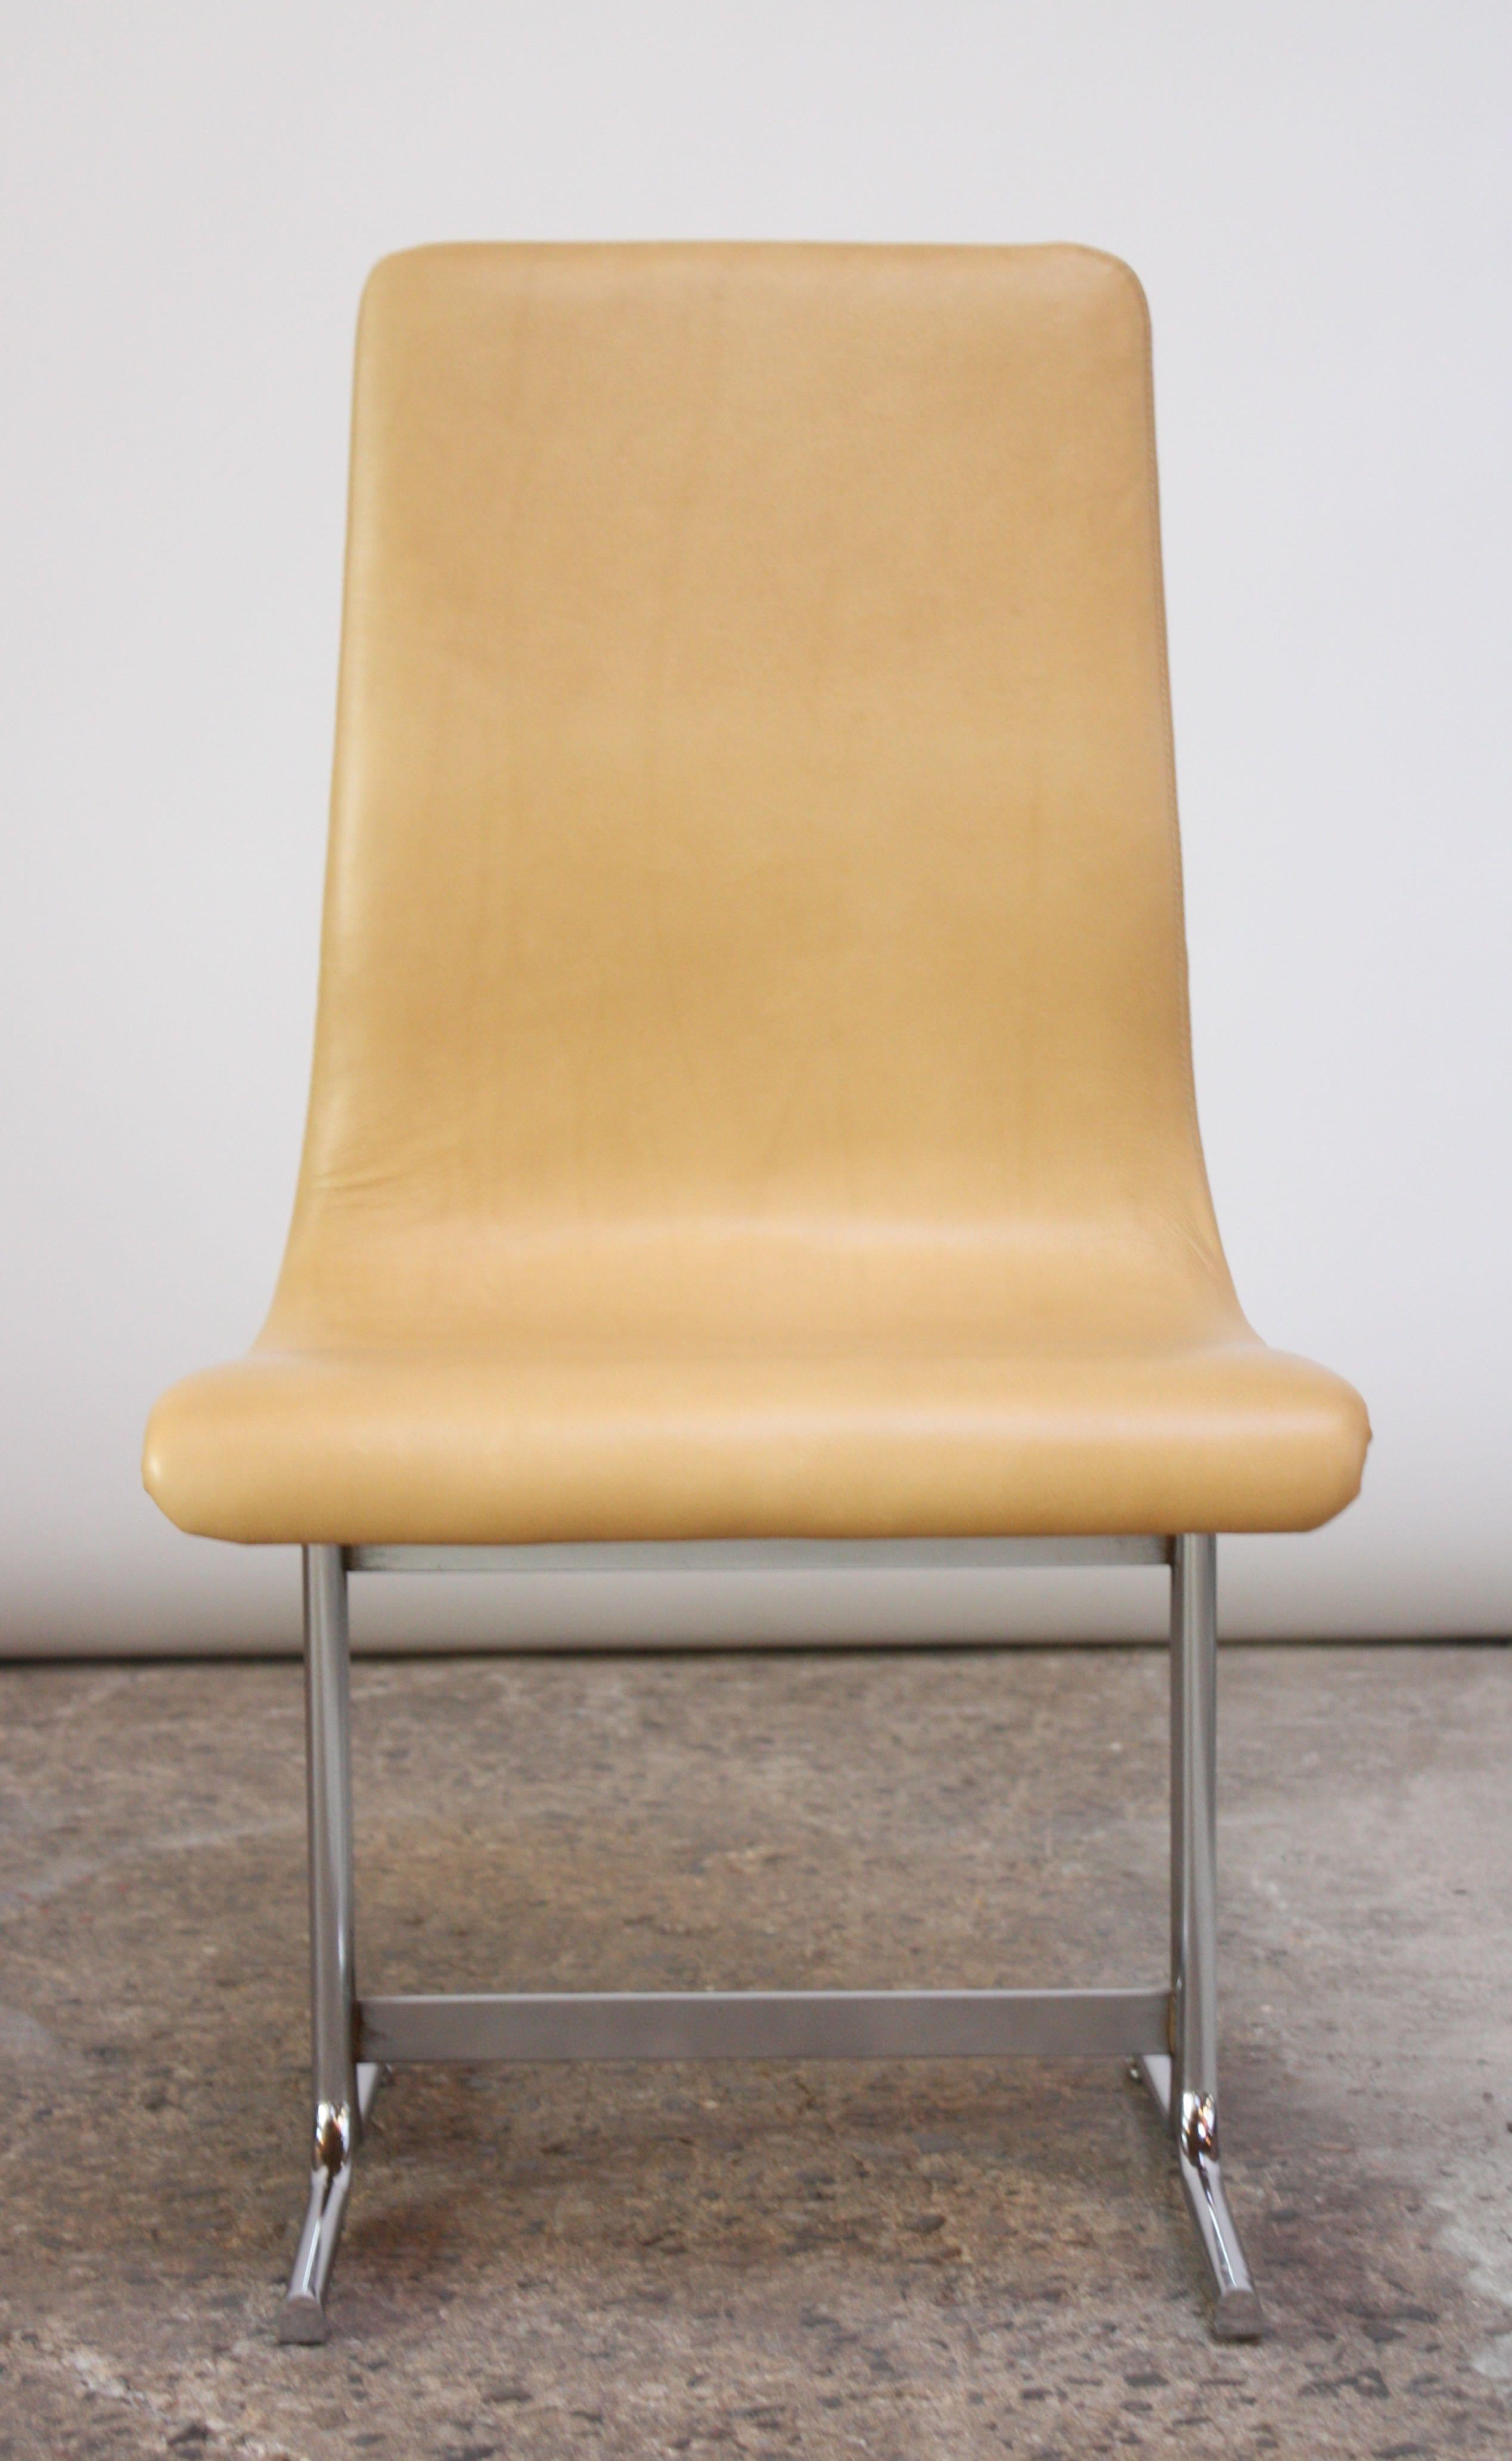 Mid-20th Century Swedish Modern Leather and Chrome Accent Chair by Vemo Industri AB For Sale